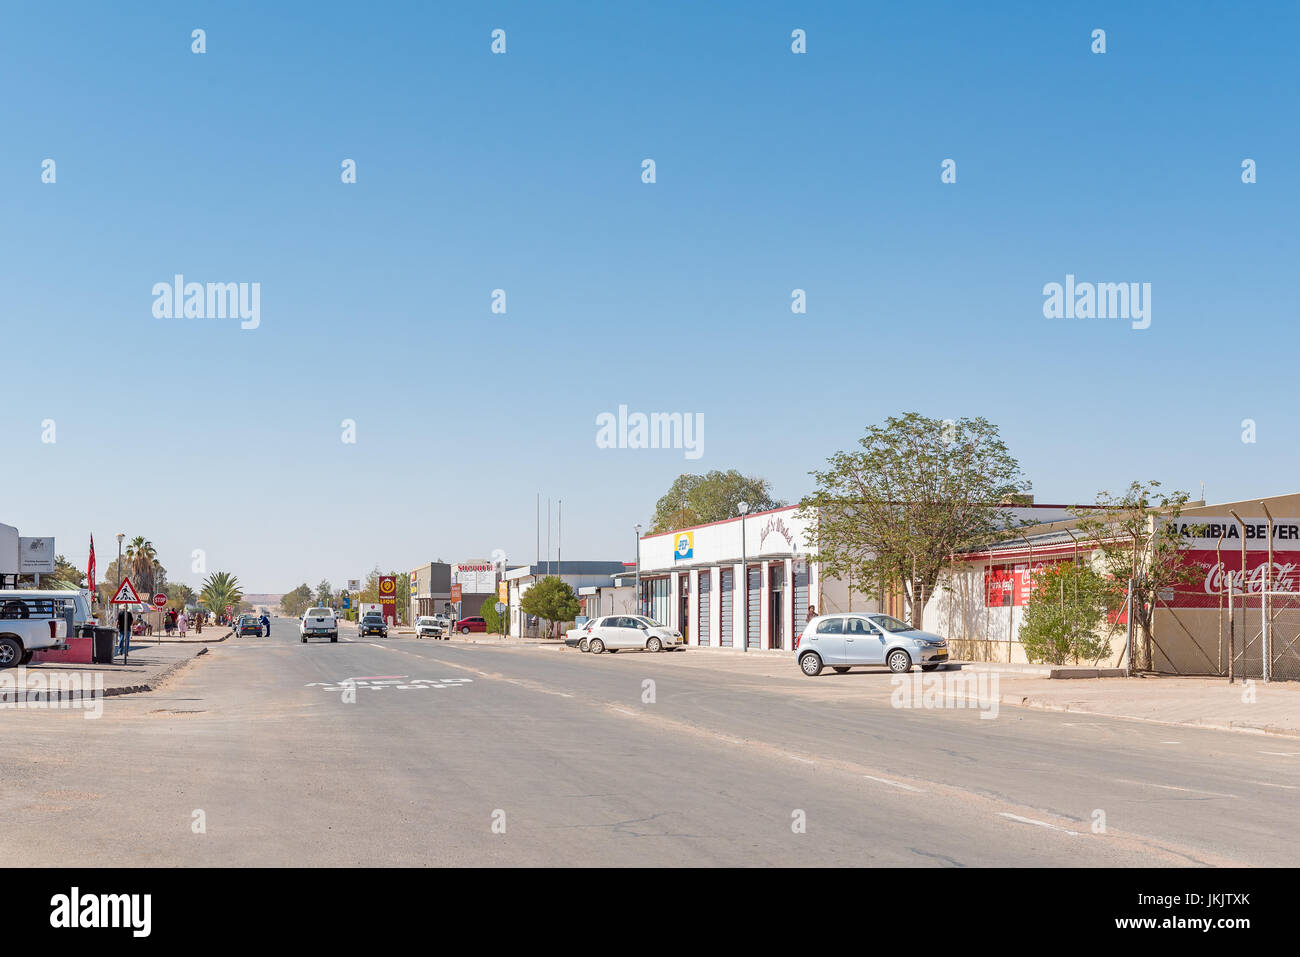 MARIENTAL, NAMIBIA - JUNE 14, 2017: A street scene with businesses and vehicles in Mariental, the capital town of the Hardap Region in Namibia Stock Photo